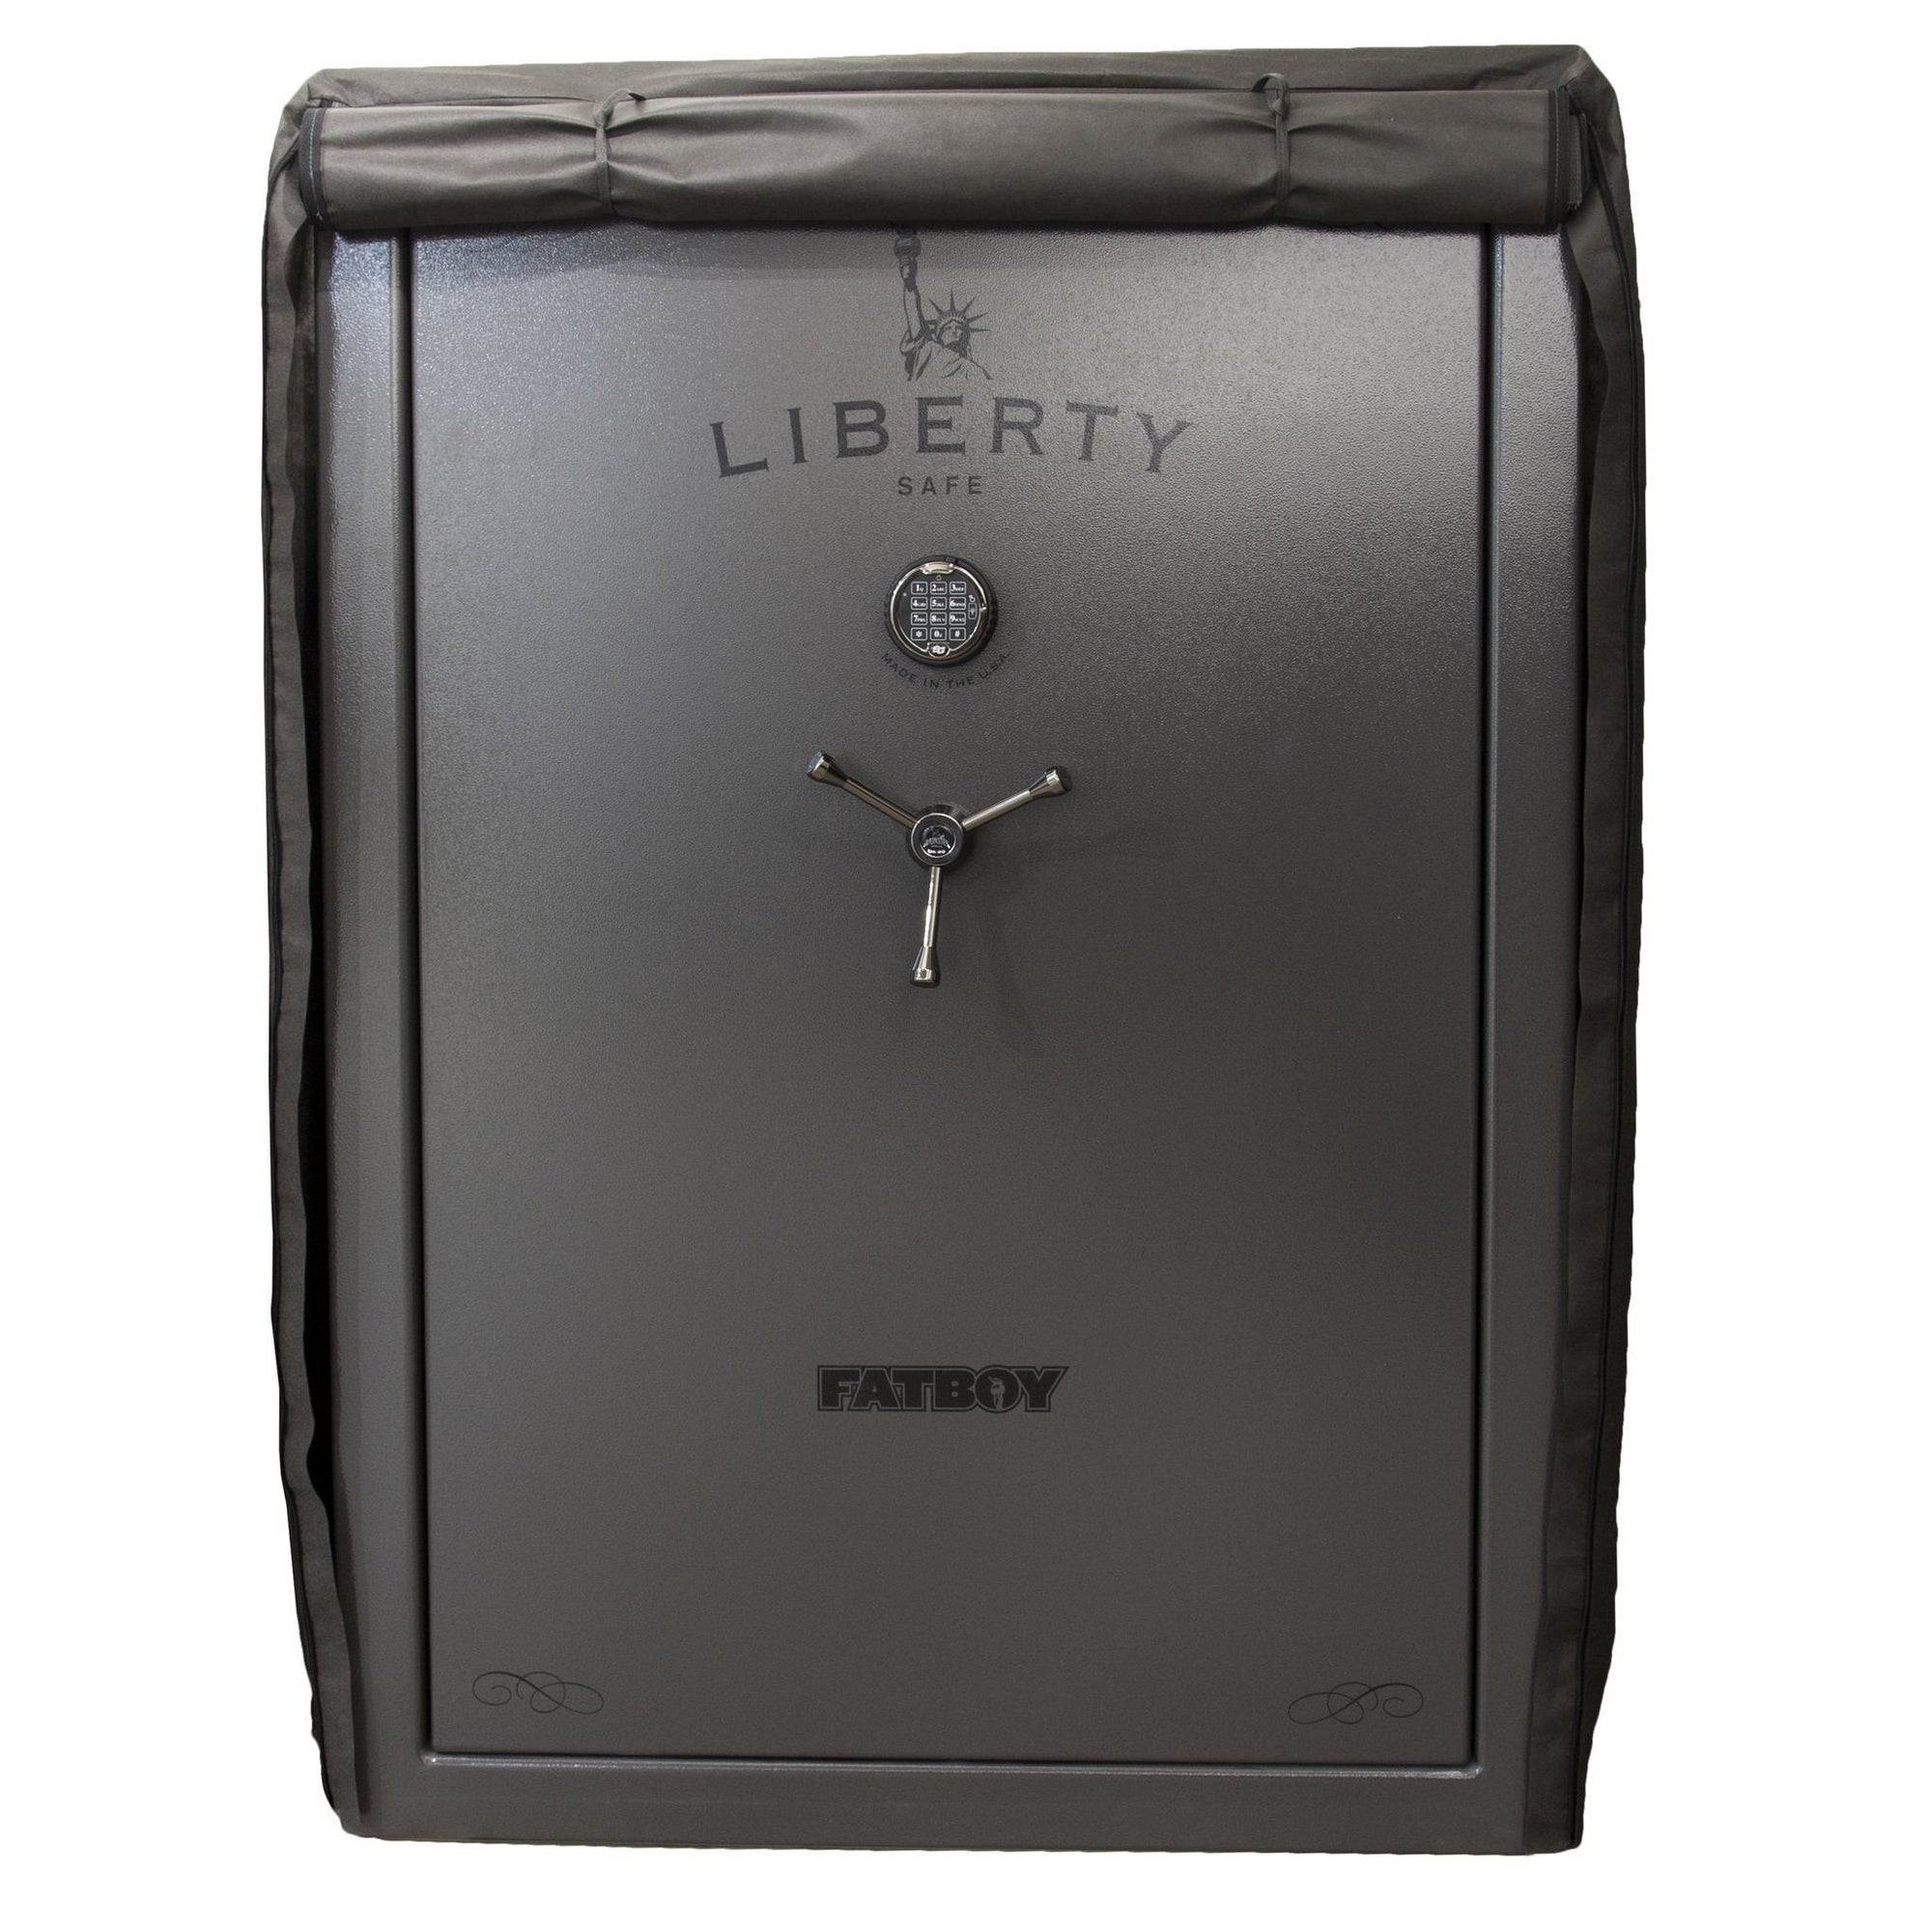 Accessory - Security - Safe Cover - 64 size safes